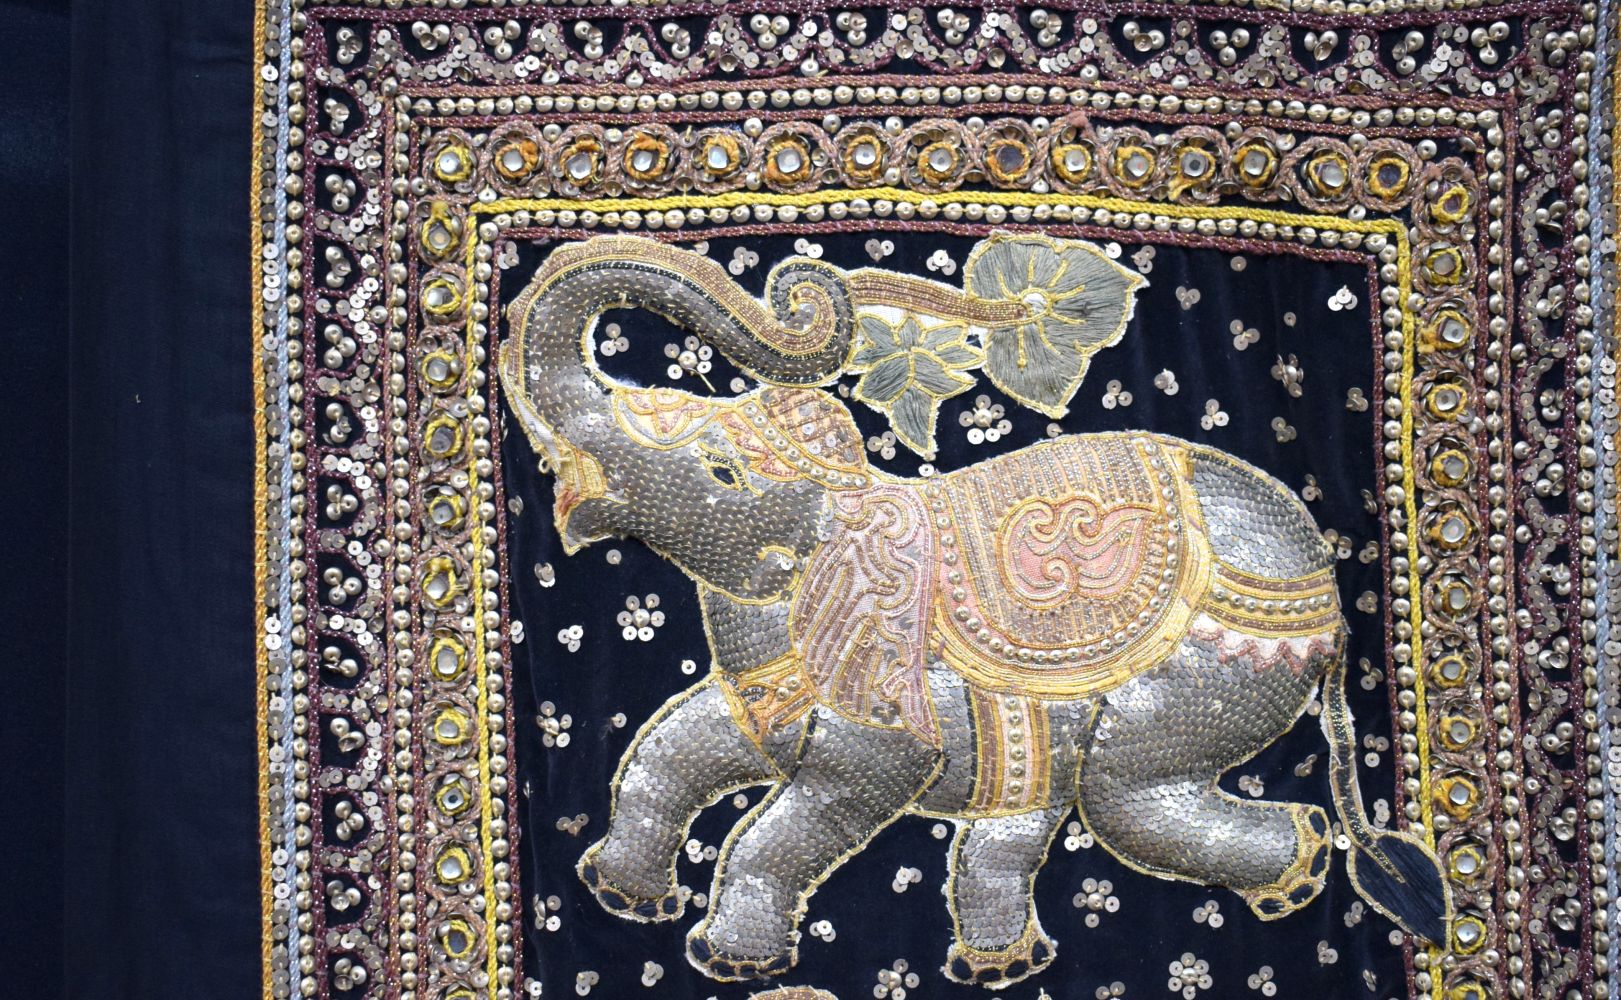 An Embroidered South East Asian Elephant wall hanging 104 x 60 cm. - Image 8 of 12